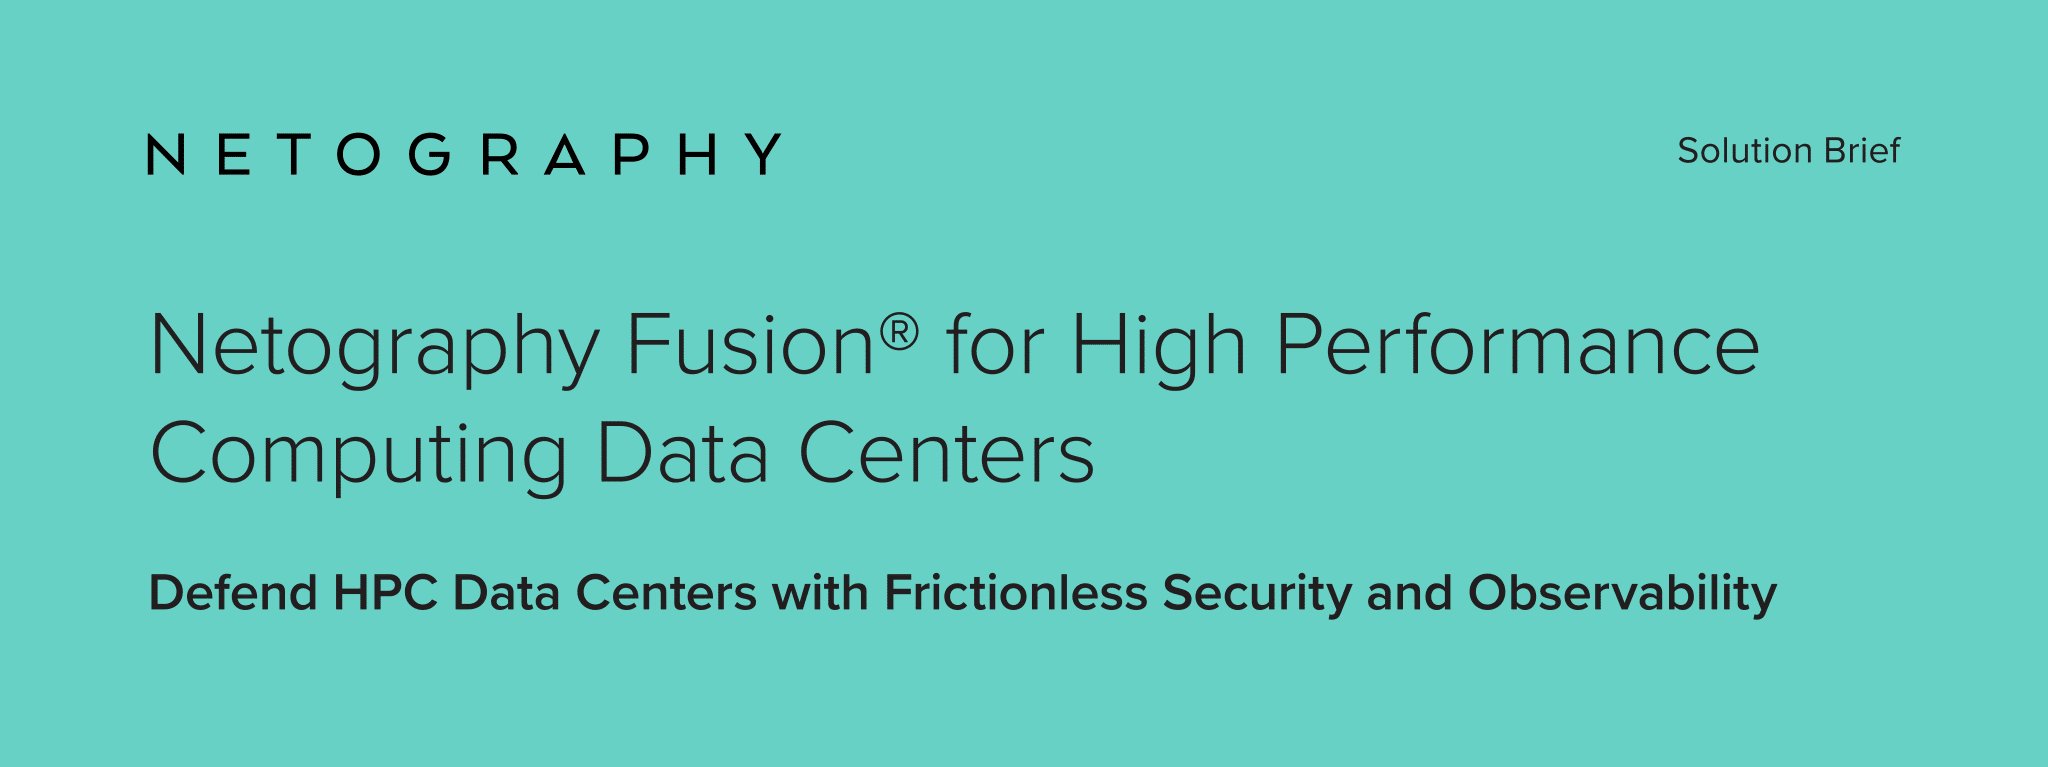 Netography Fusion for High Performance Computing Data Centers